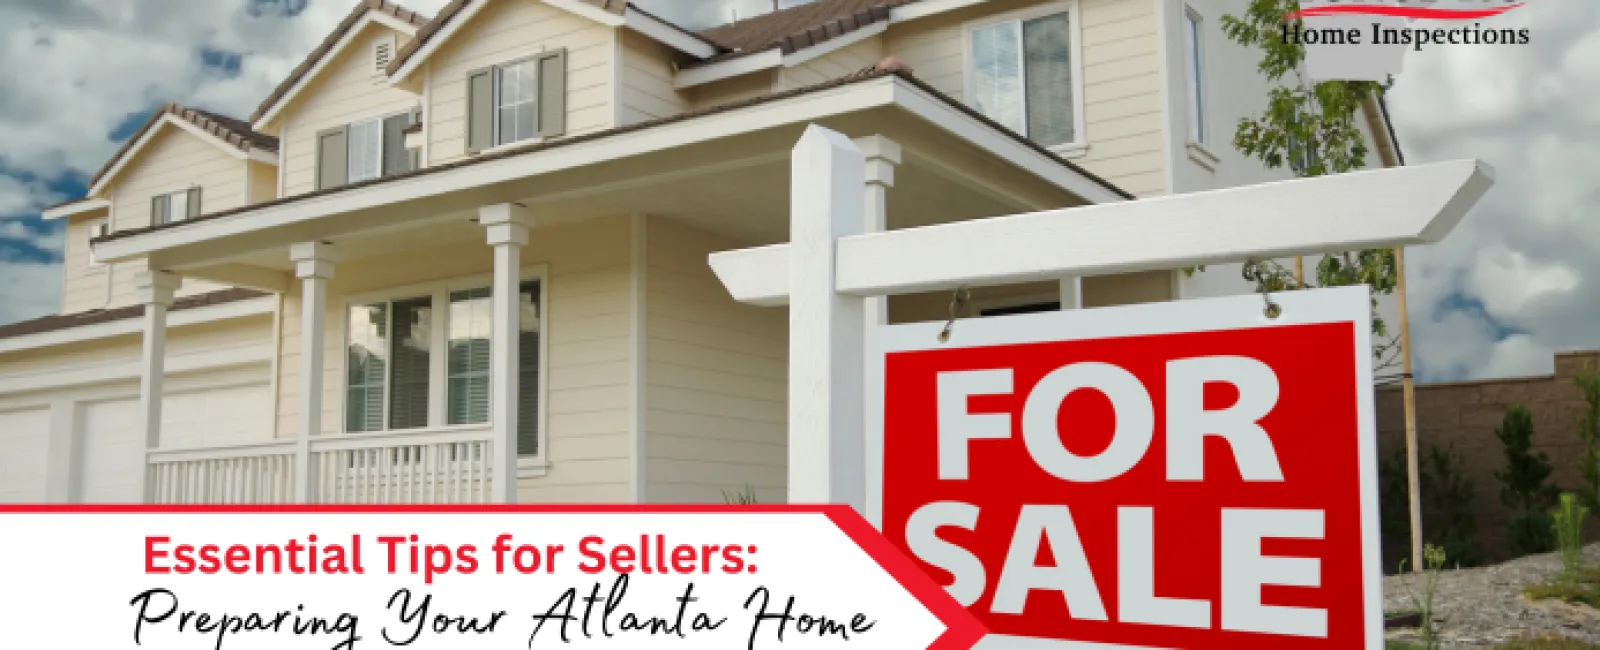 Essential Tips for Sellers: Preparing Your Atlanta Home for Inspection